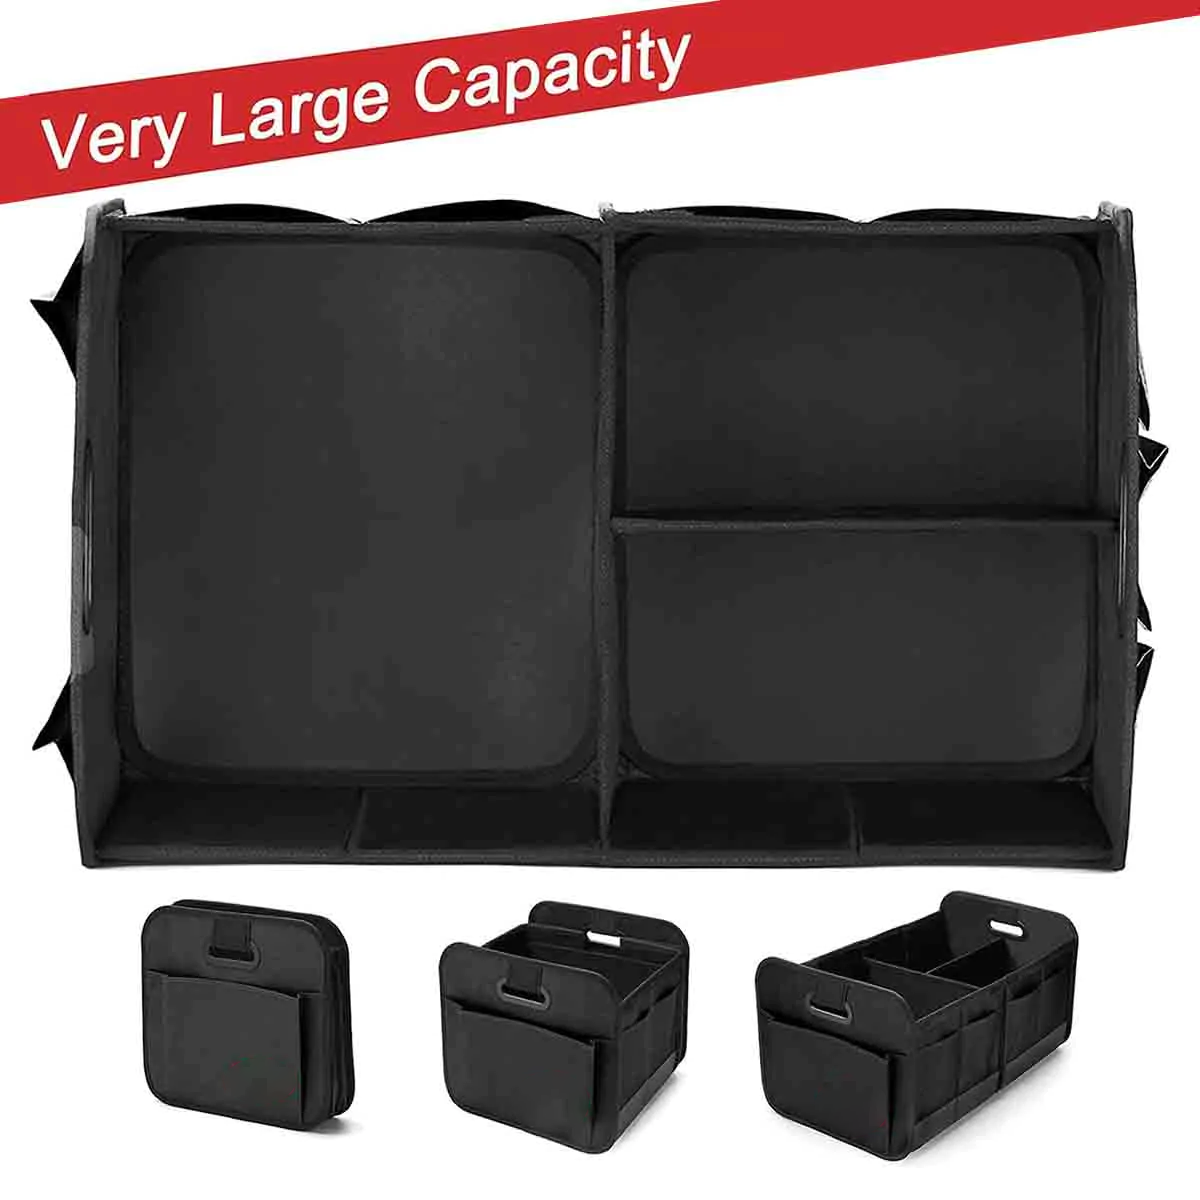 Custom Text For Car Trunk Organizer Storage, Compatible with All Cars, Reinforced Handles, Collapsible Multi, Compartment Car Organizers, Foldable and Waterproof, 600D Oxford Polyester AR12995